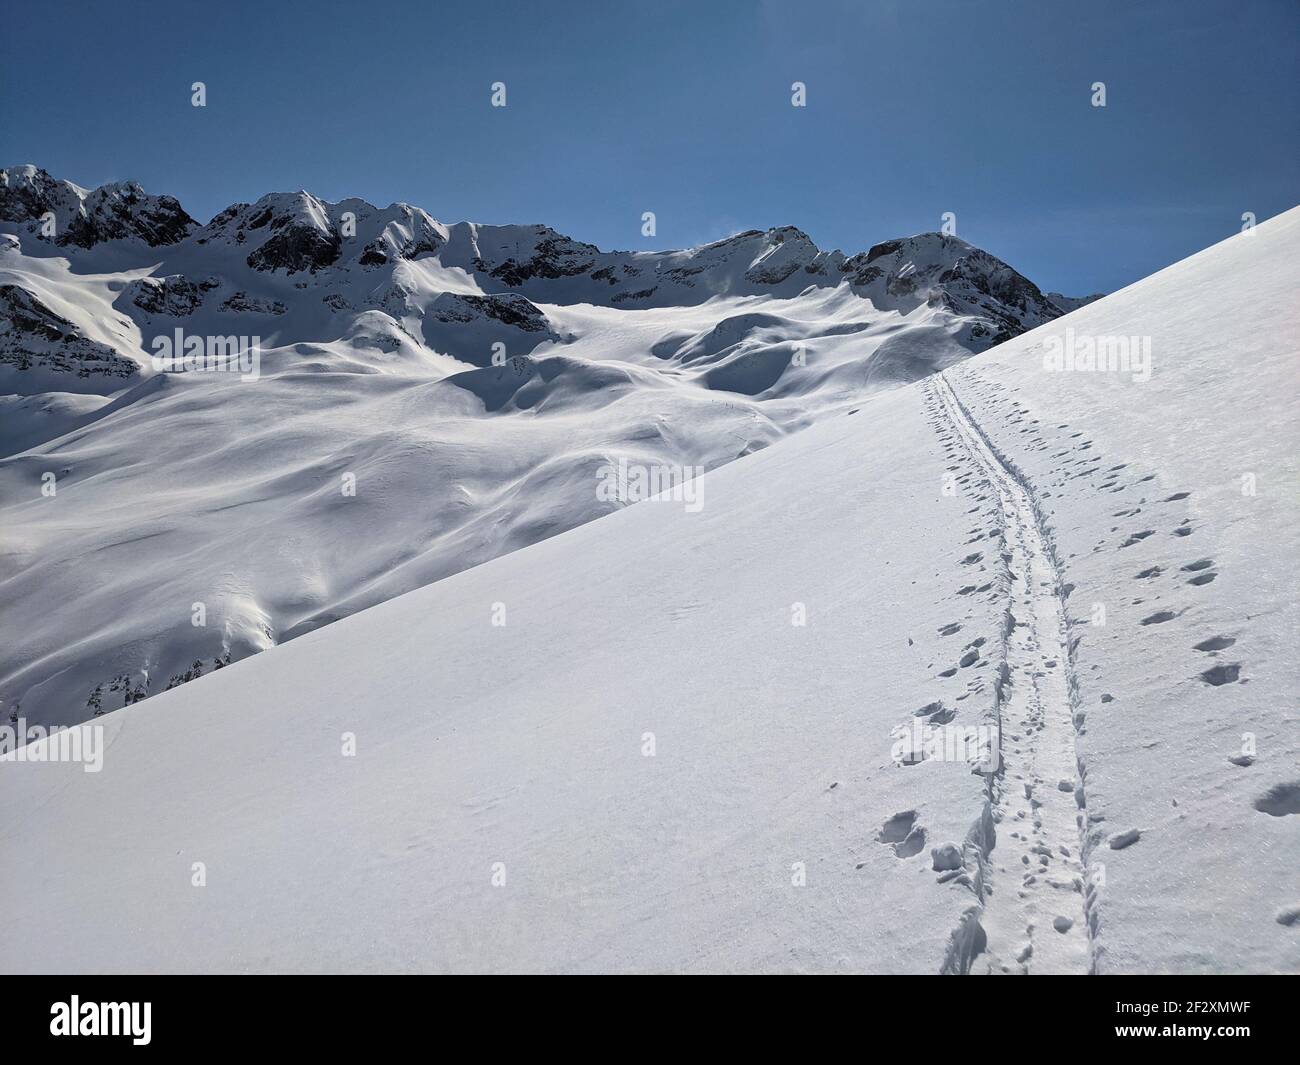 ski touring track in a grandiose winter landscape with high mountains. Mountaineering in the Ducan valley above Davos Stock Photo